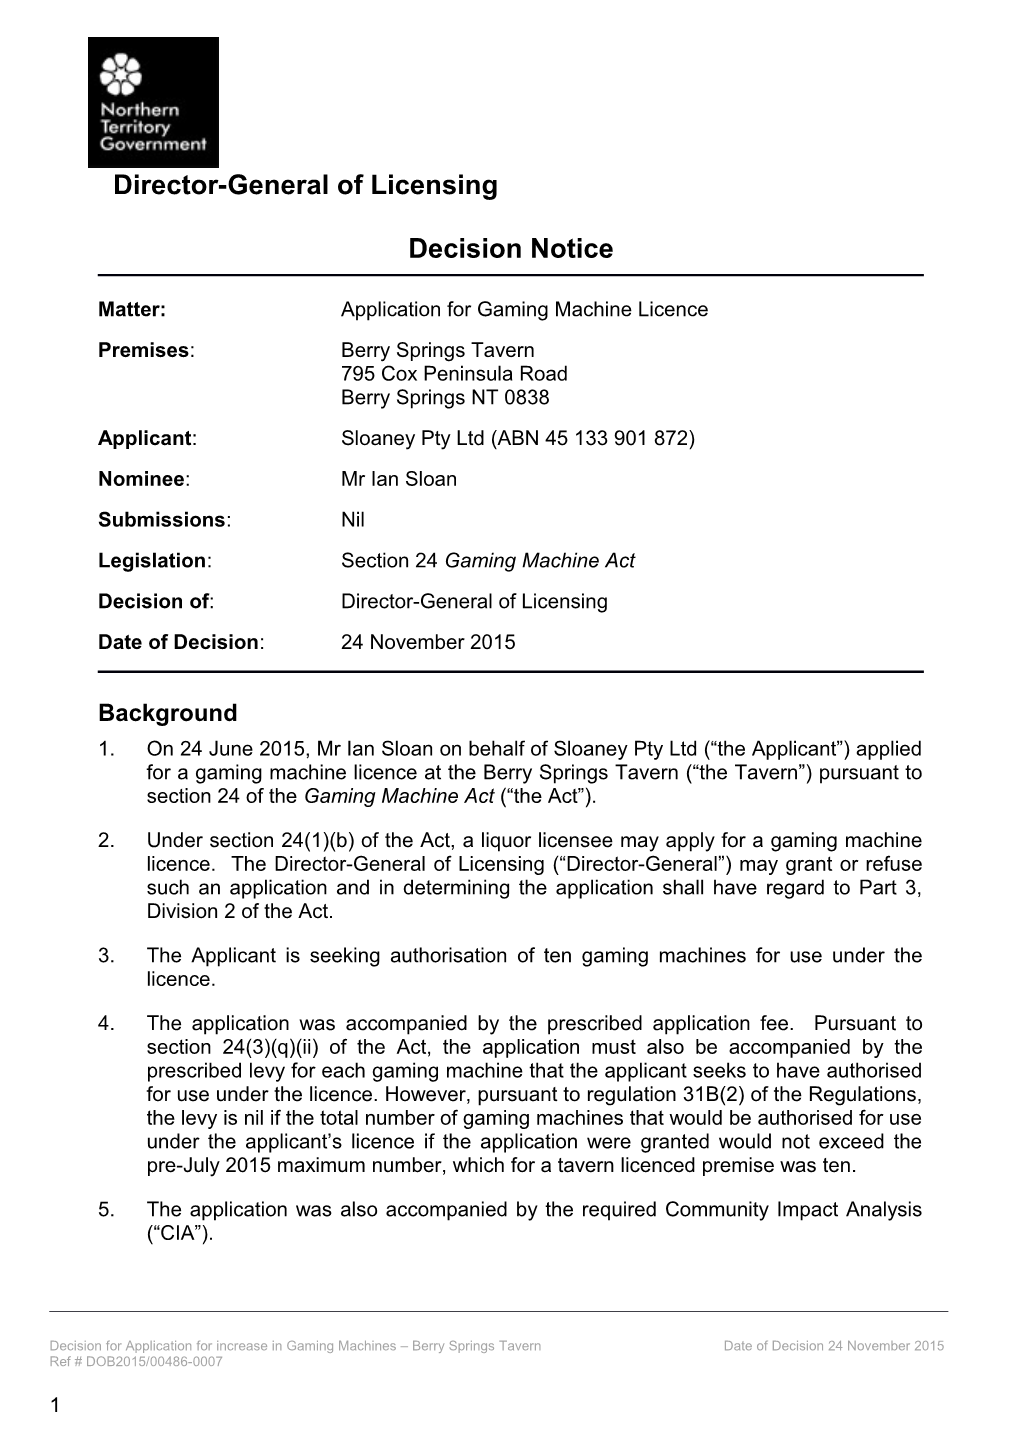 Berry Springs Tavern - Application for New Gaming Machine Licence